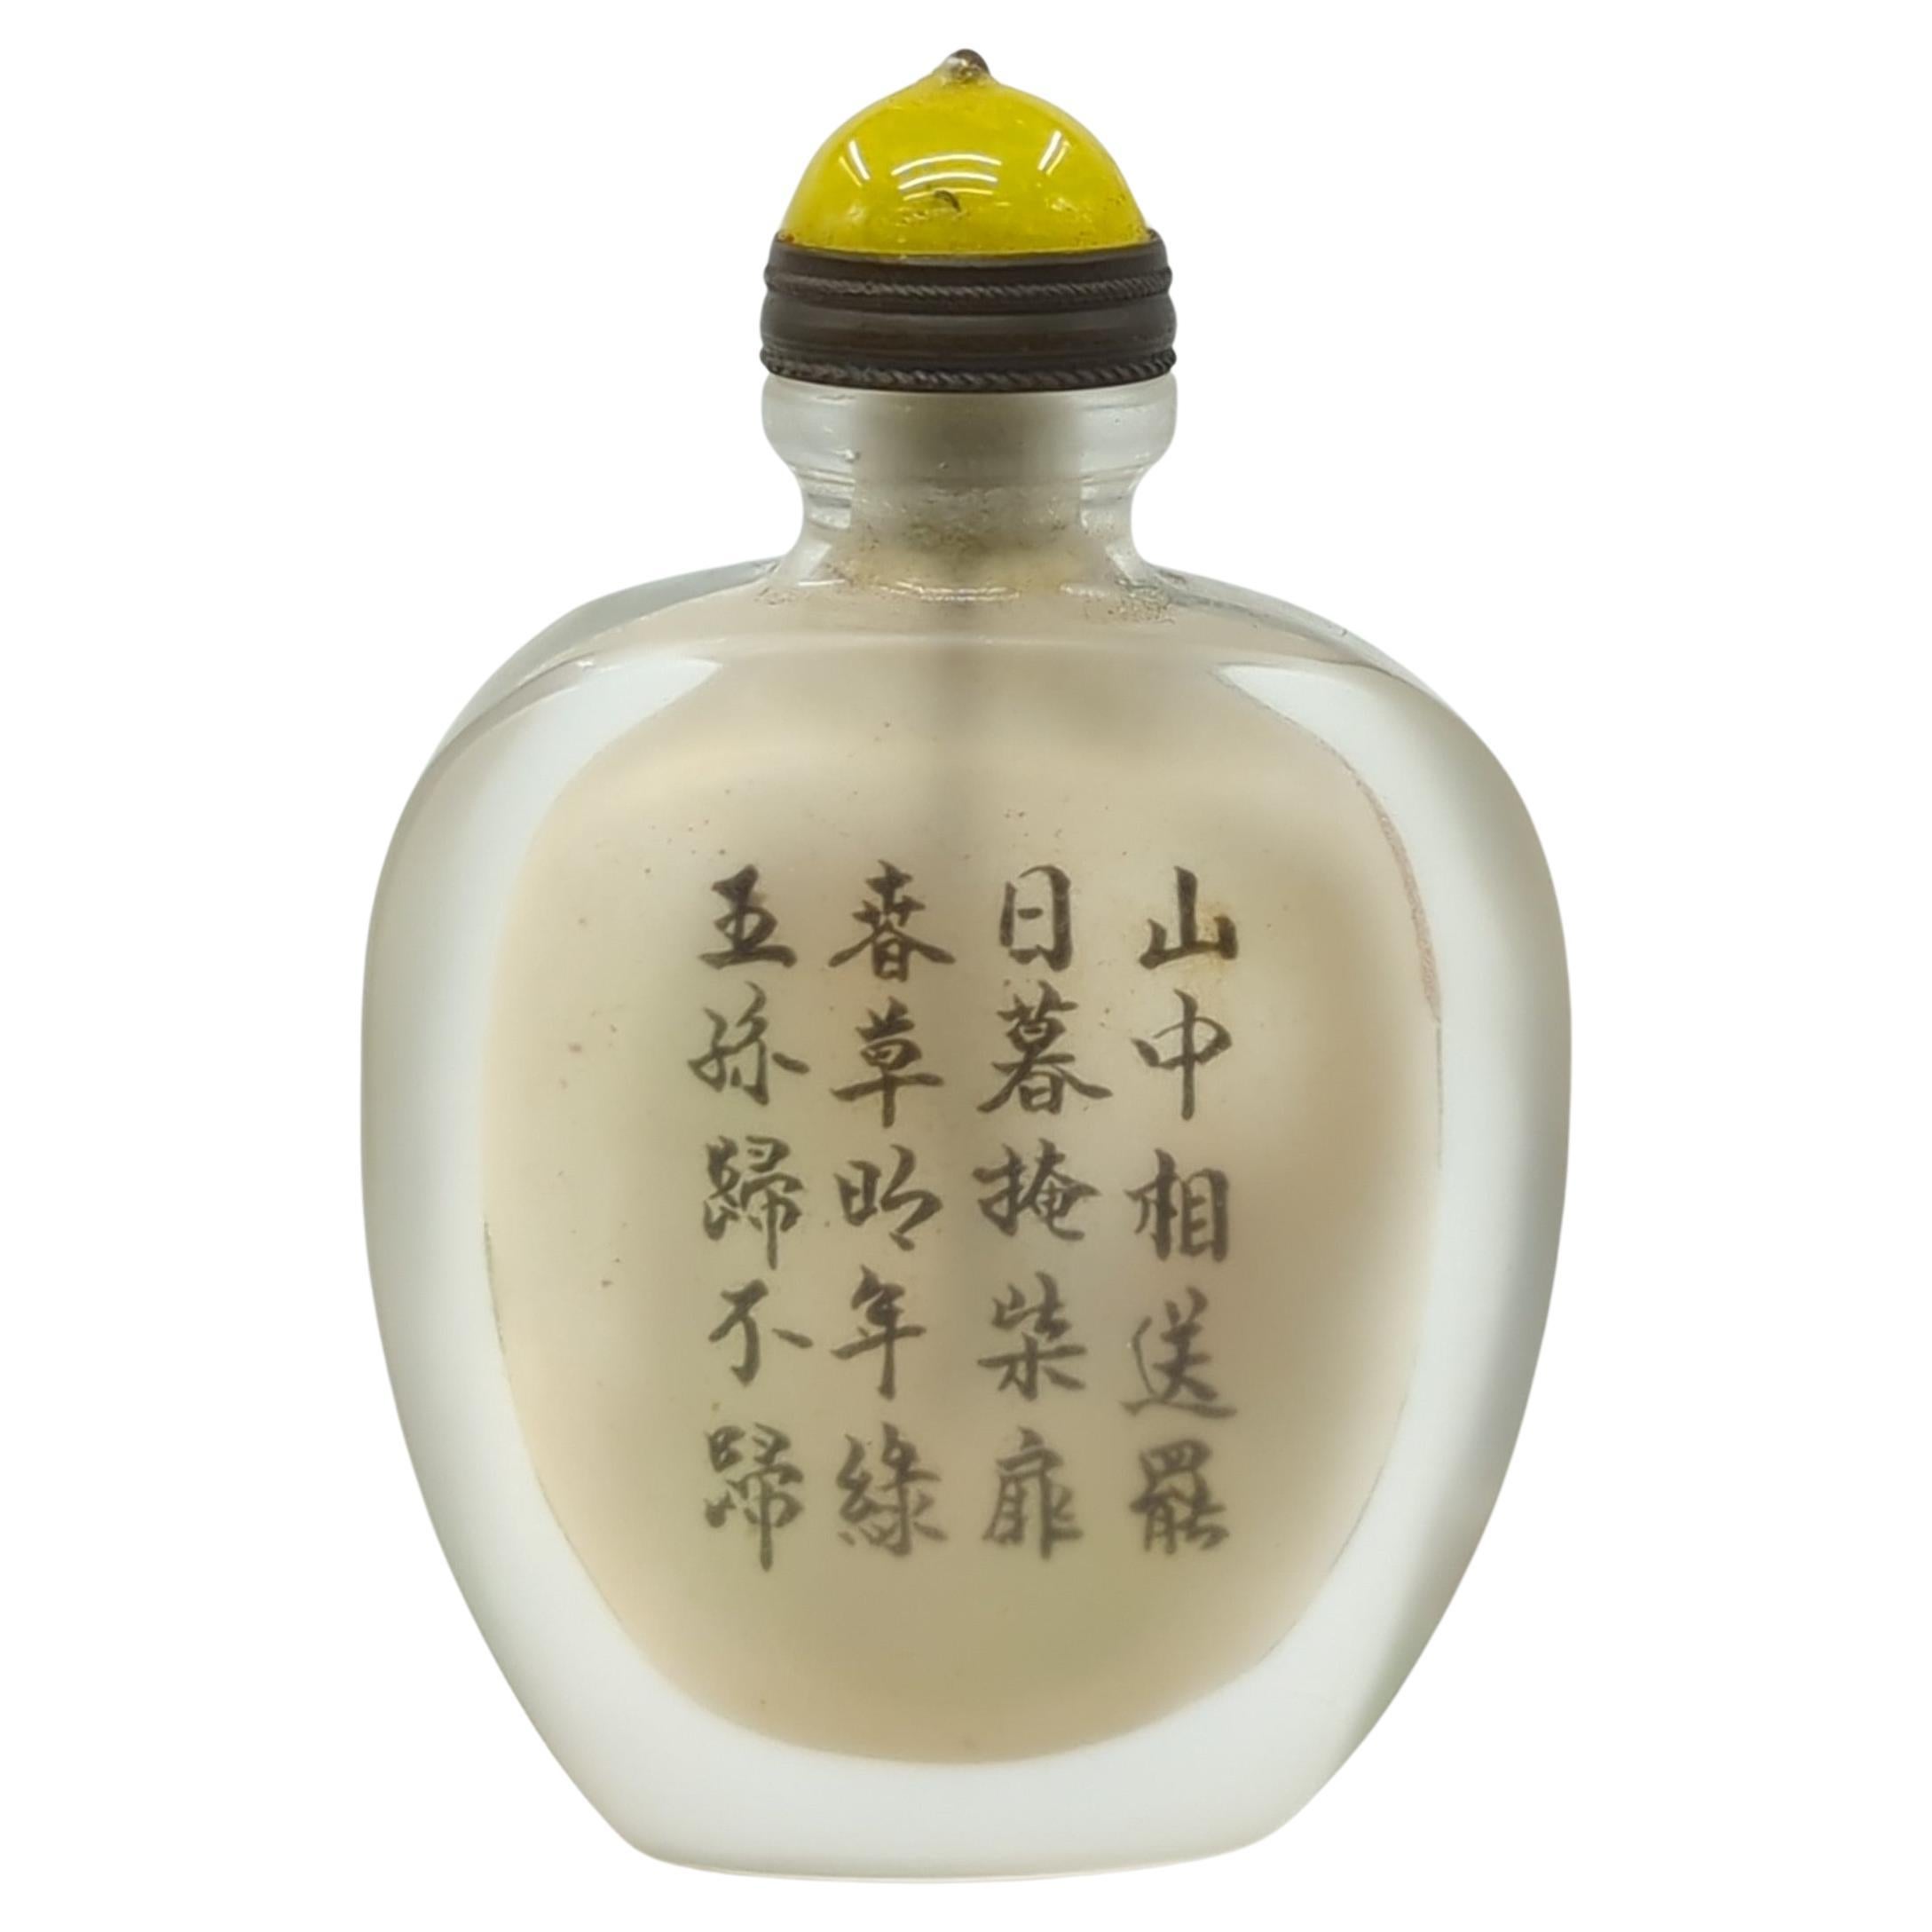 A vintage Chinese inside painted glass snuff bottle, hand painted with figures  below a pine tree to one side, and poetic versus in calligraphy to verso

The finely painted figural scene is accompanied by the text  